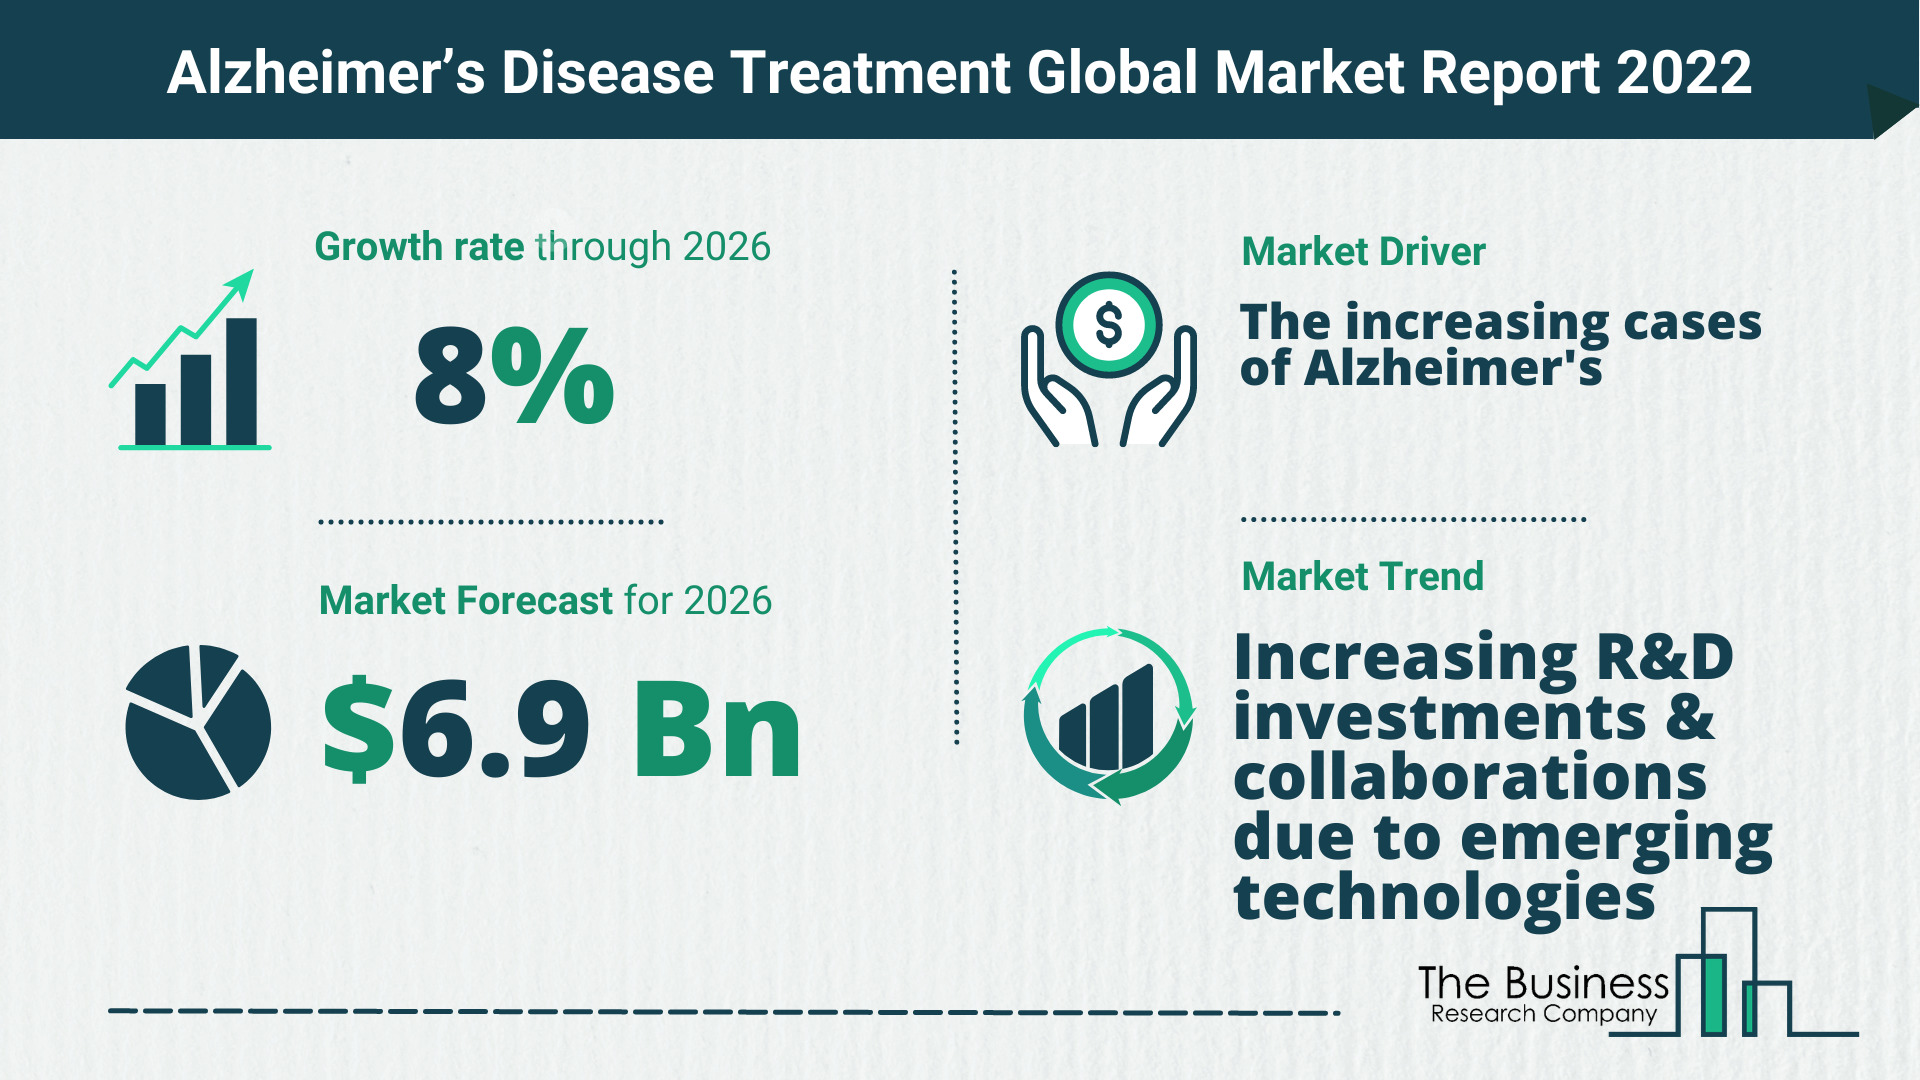 How Will The Alzheimer’s Disease Treatment Market Grow In 2022?